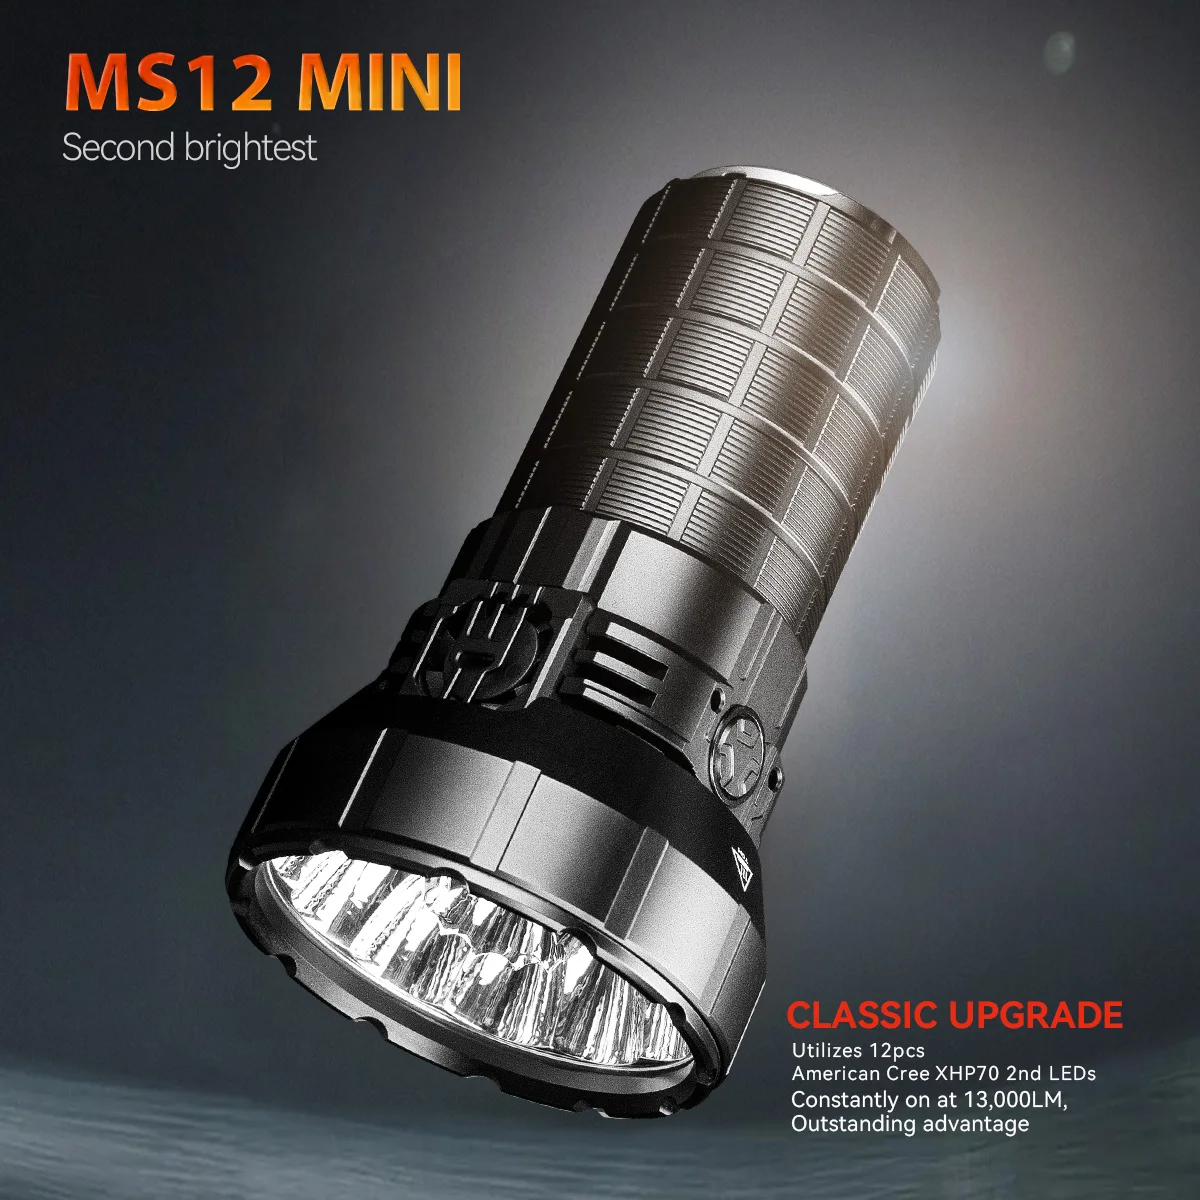 IMALENT MS12 MINI Powerful Flashlight CREE XHP70.2 LED 65000 Lumens Rechargeable Ultra-Bright Torch for Camping and Hiking